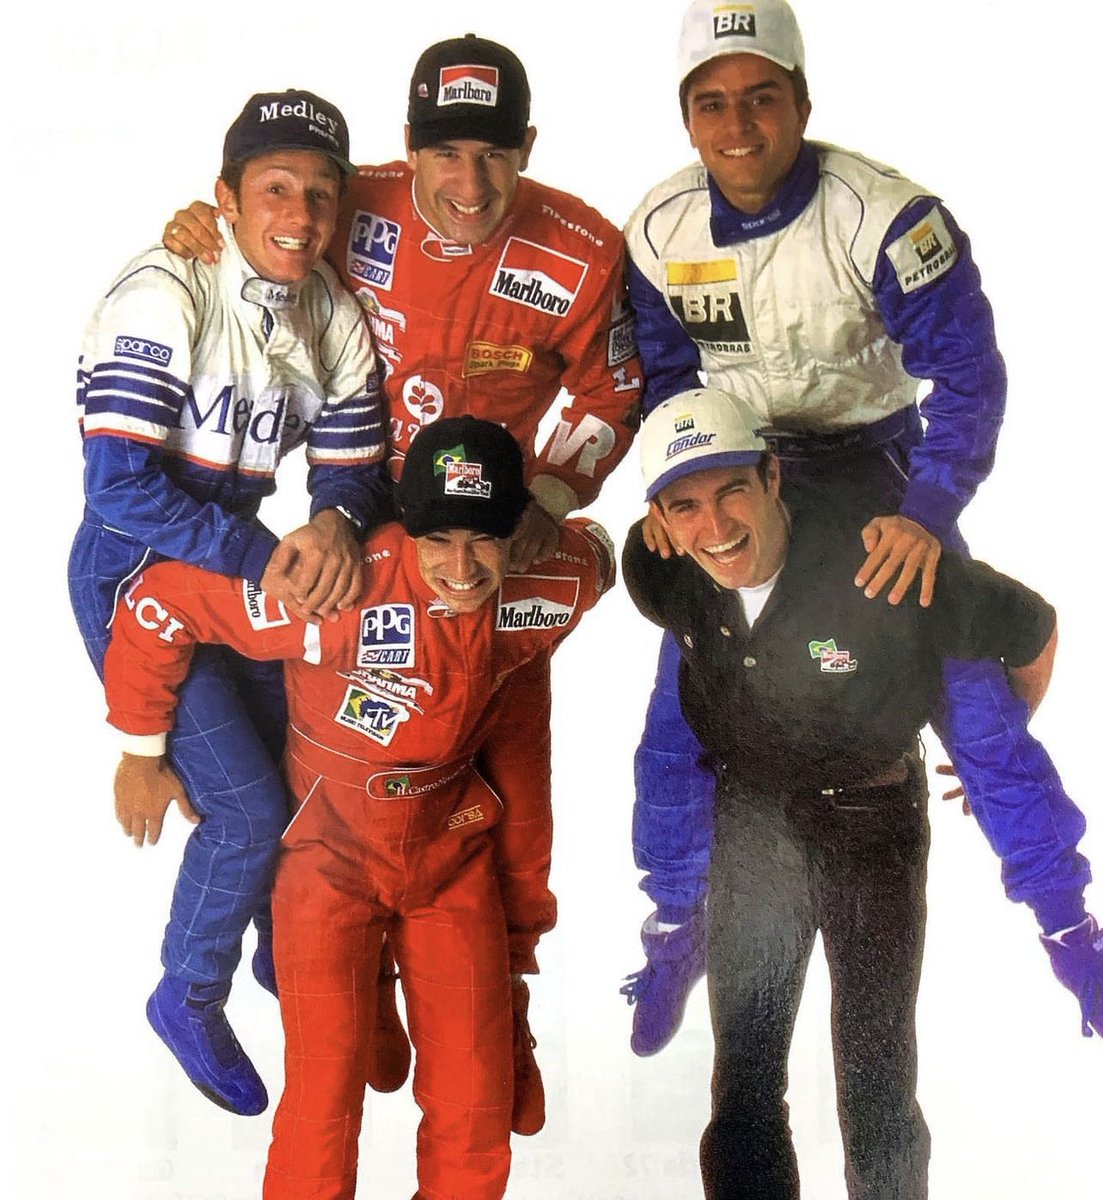 🇺🇸 #tbt The Brazilian crew in 97! @Kikizenga @h3lio and myself in IndyLights, Max Wilson and Ricardo Zonta in F3000. Good old days having fun for a magazine shoot.